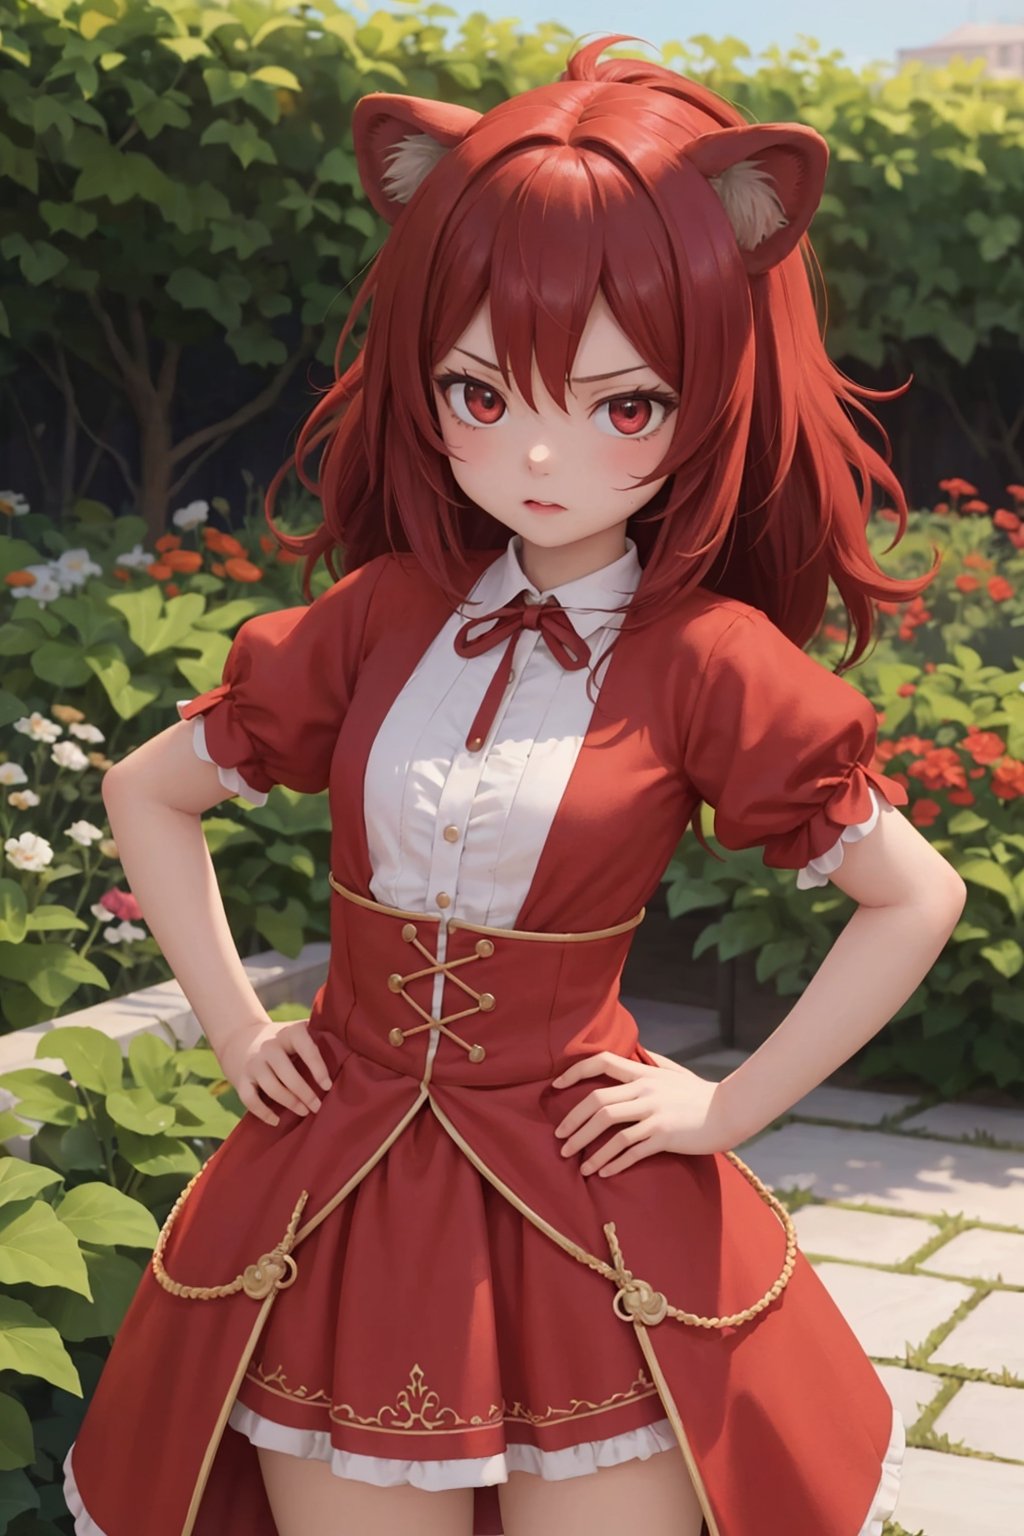 Masterpiece, best_quality, intricate_details, 1girl, cute, loli, young, red_eyes, red_hair, lion_ears, lion_tail, glaring, hands_on_hips, fluffy_hair, regal_outfit, garden